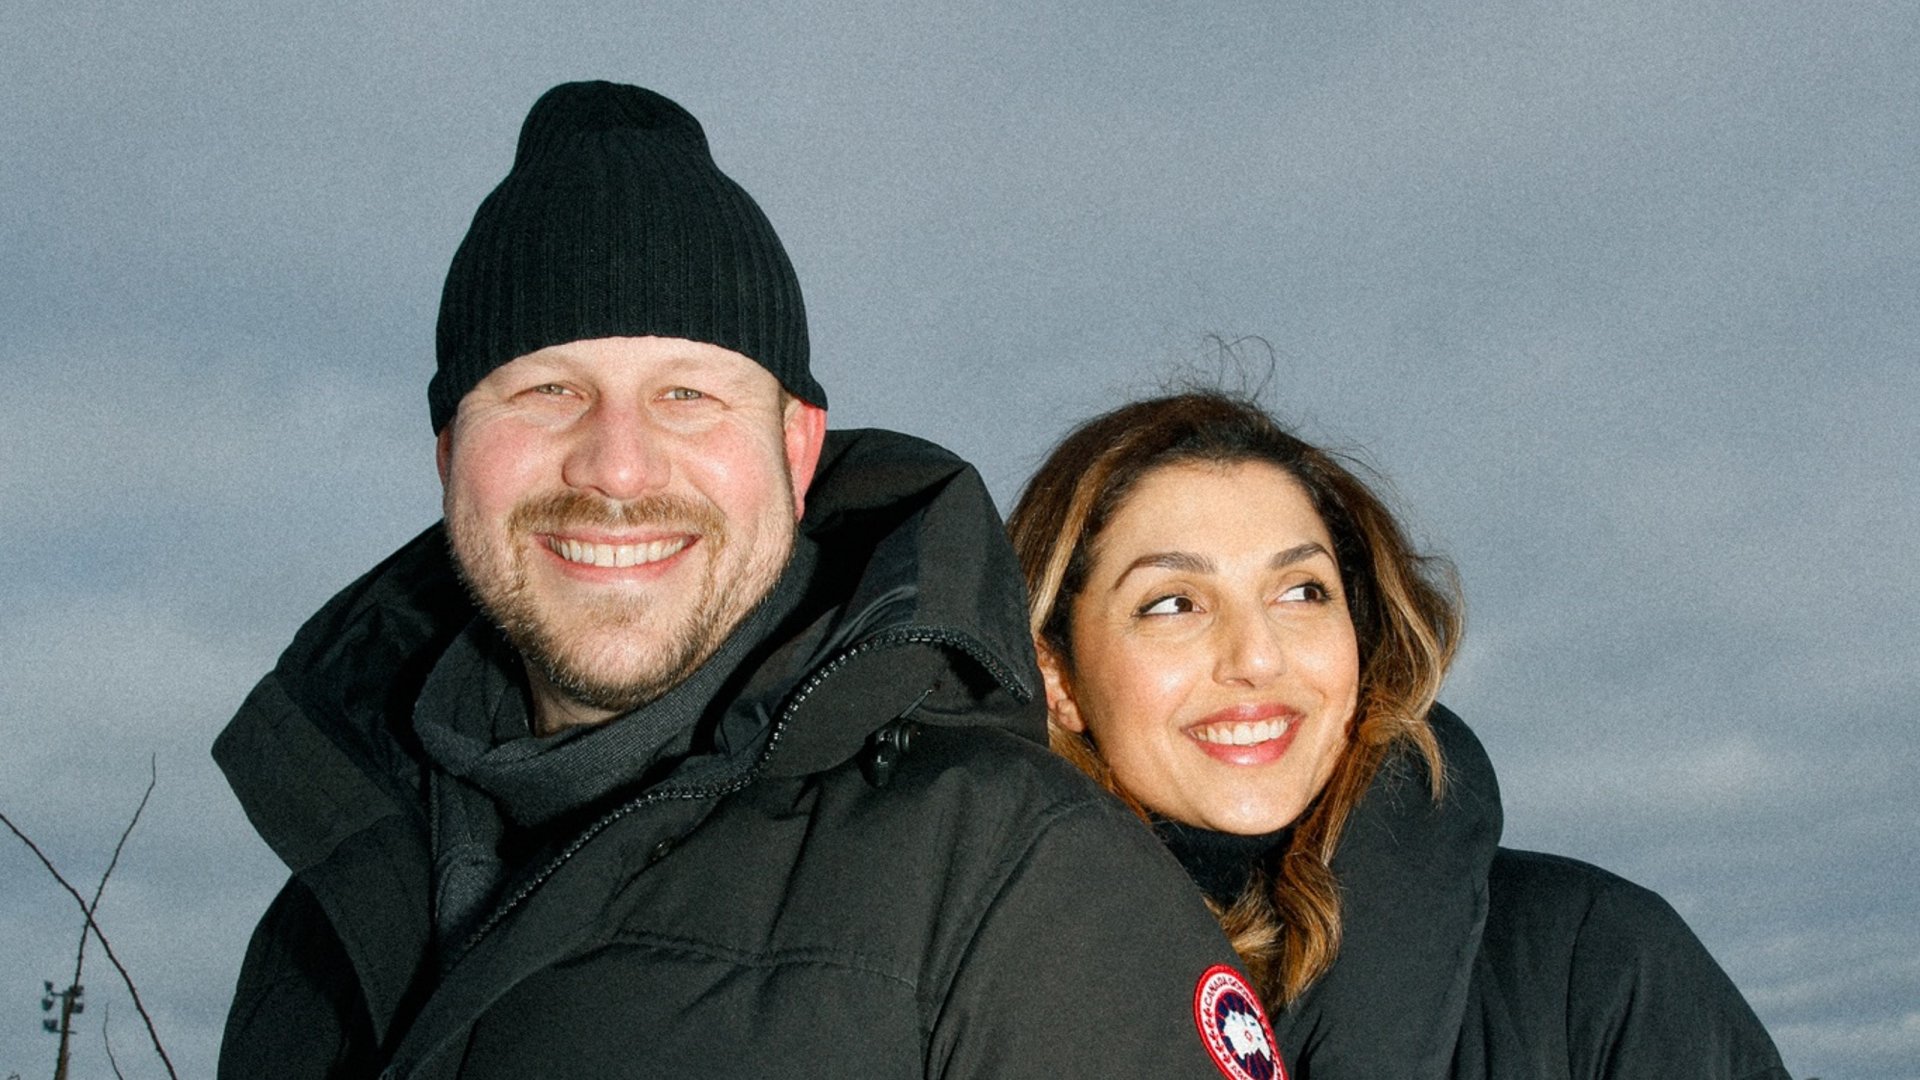 Christian Lystrup, co-founder and CEO Vidde, and Yalda Mirbaz , co-founder and CFO Vidde